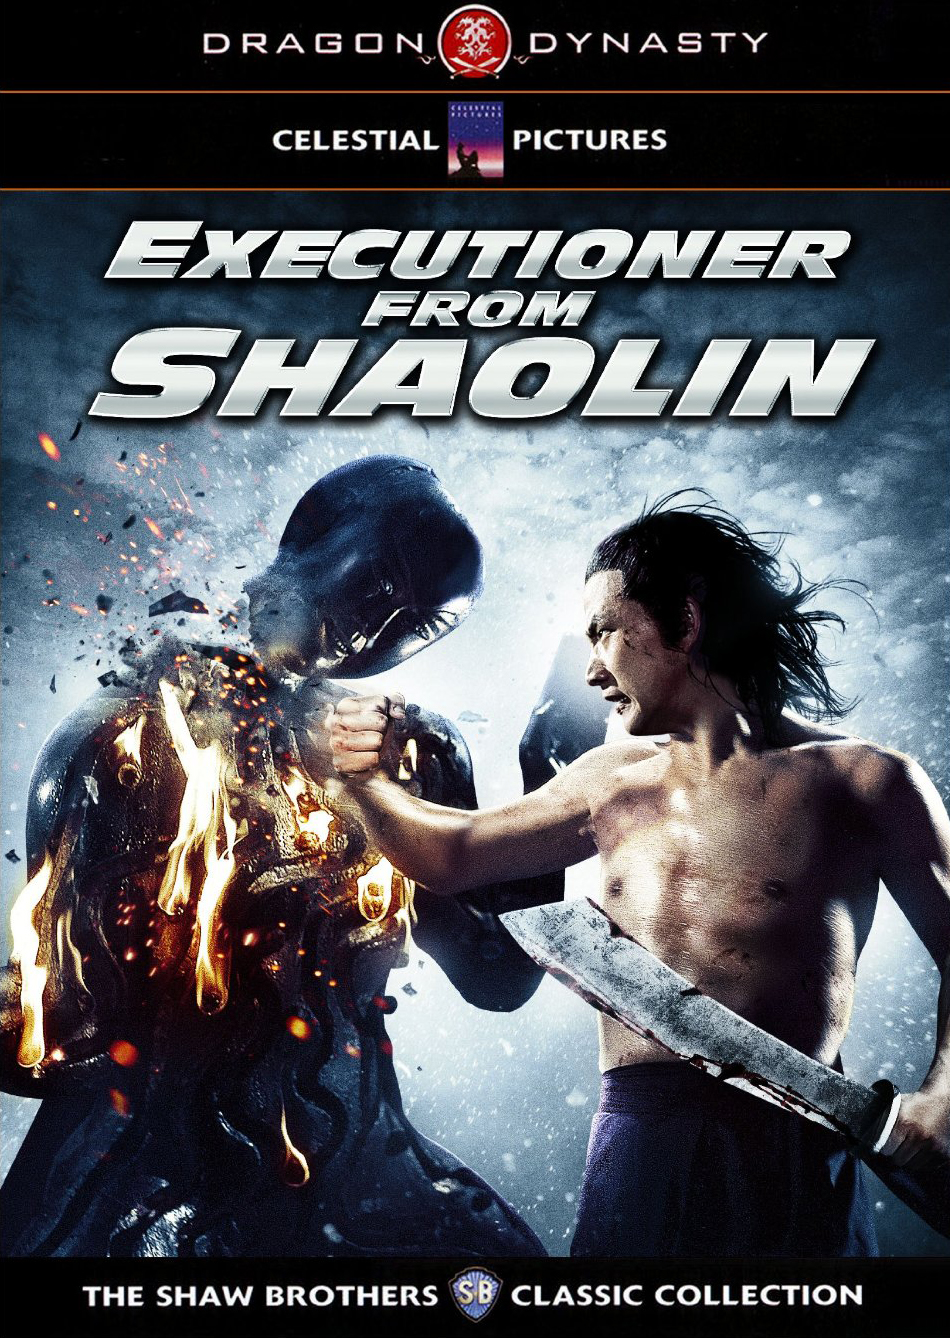 EXECUTIONERS FROM SHAOLIN - 1977 - Chia-Liand Lu Exexutioners-of-Shaolin